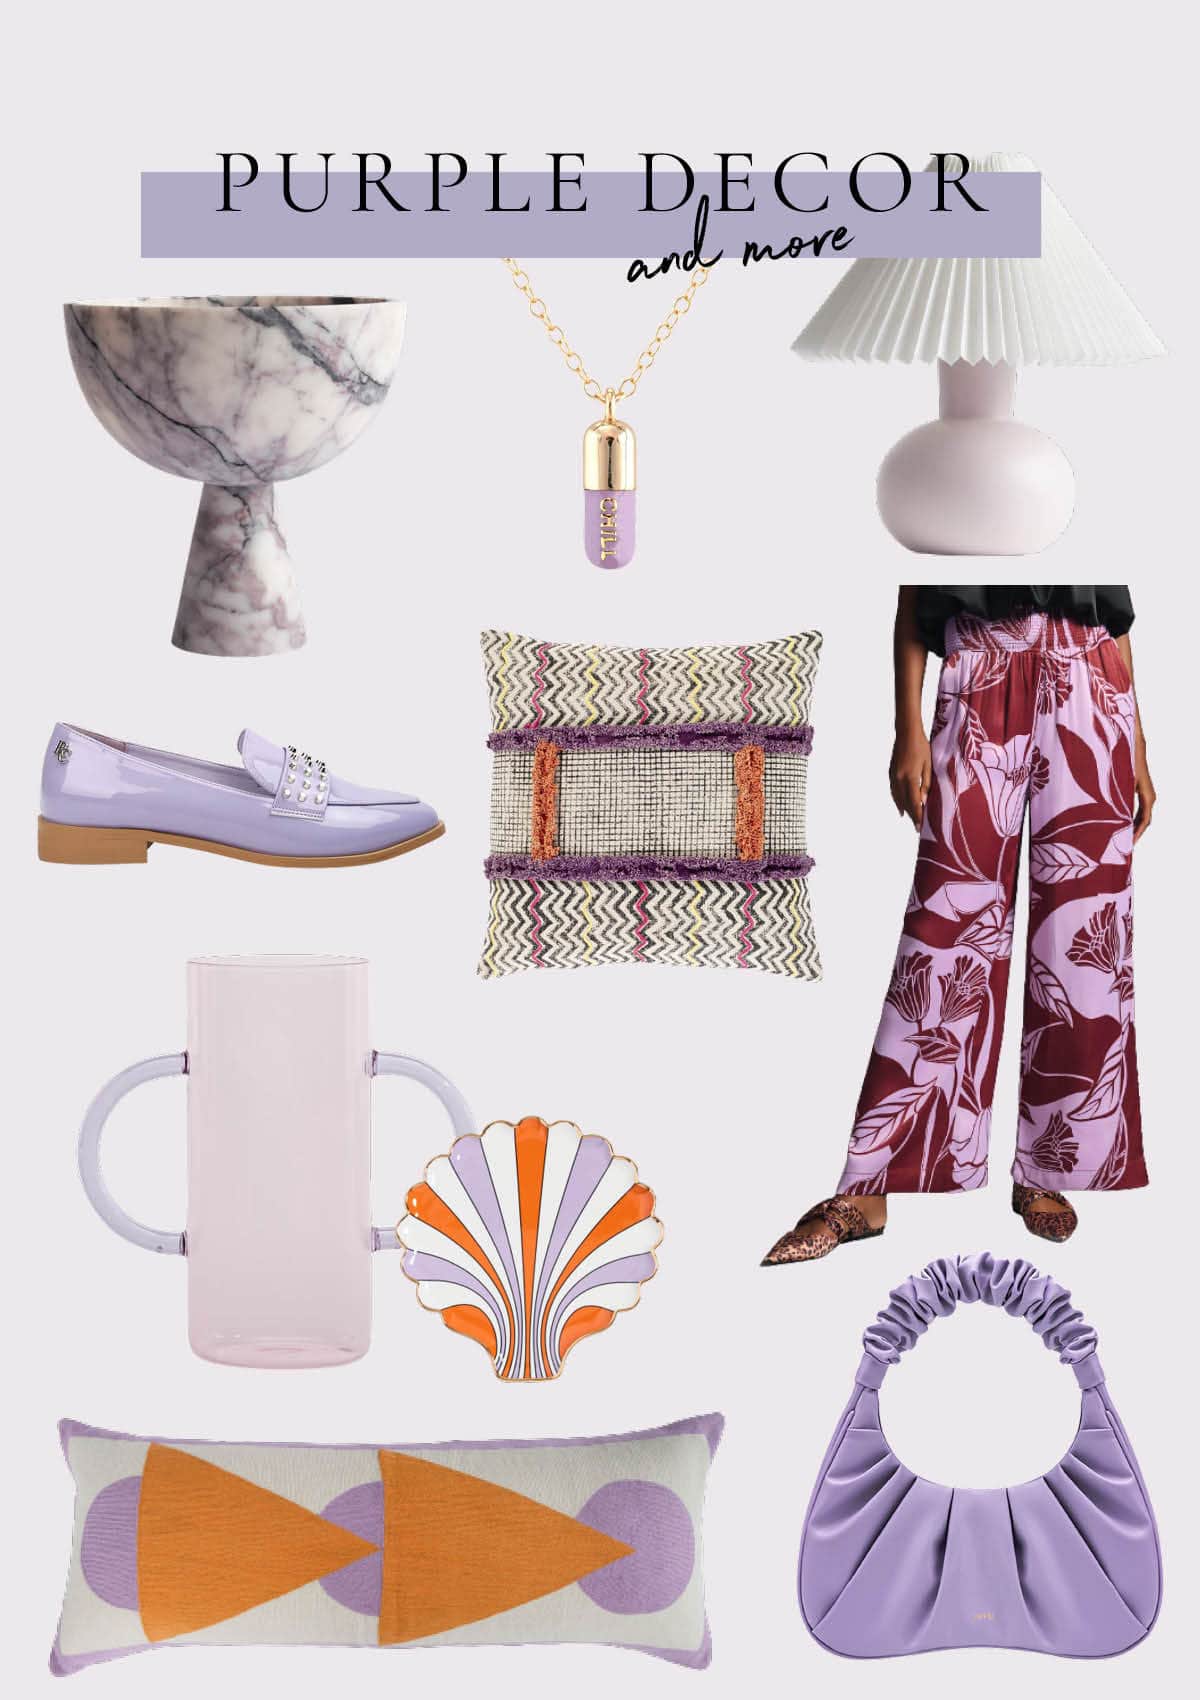 Purple and lilac decor is trending in 2023 - Purple decor is making its way back into interior design. Here are a few trending lilac and lavender decor picks.